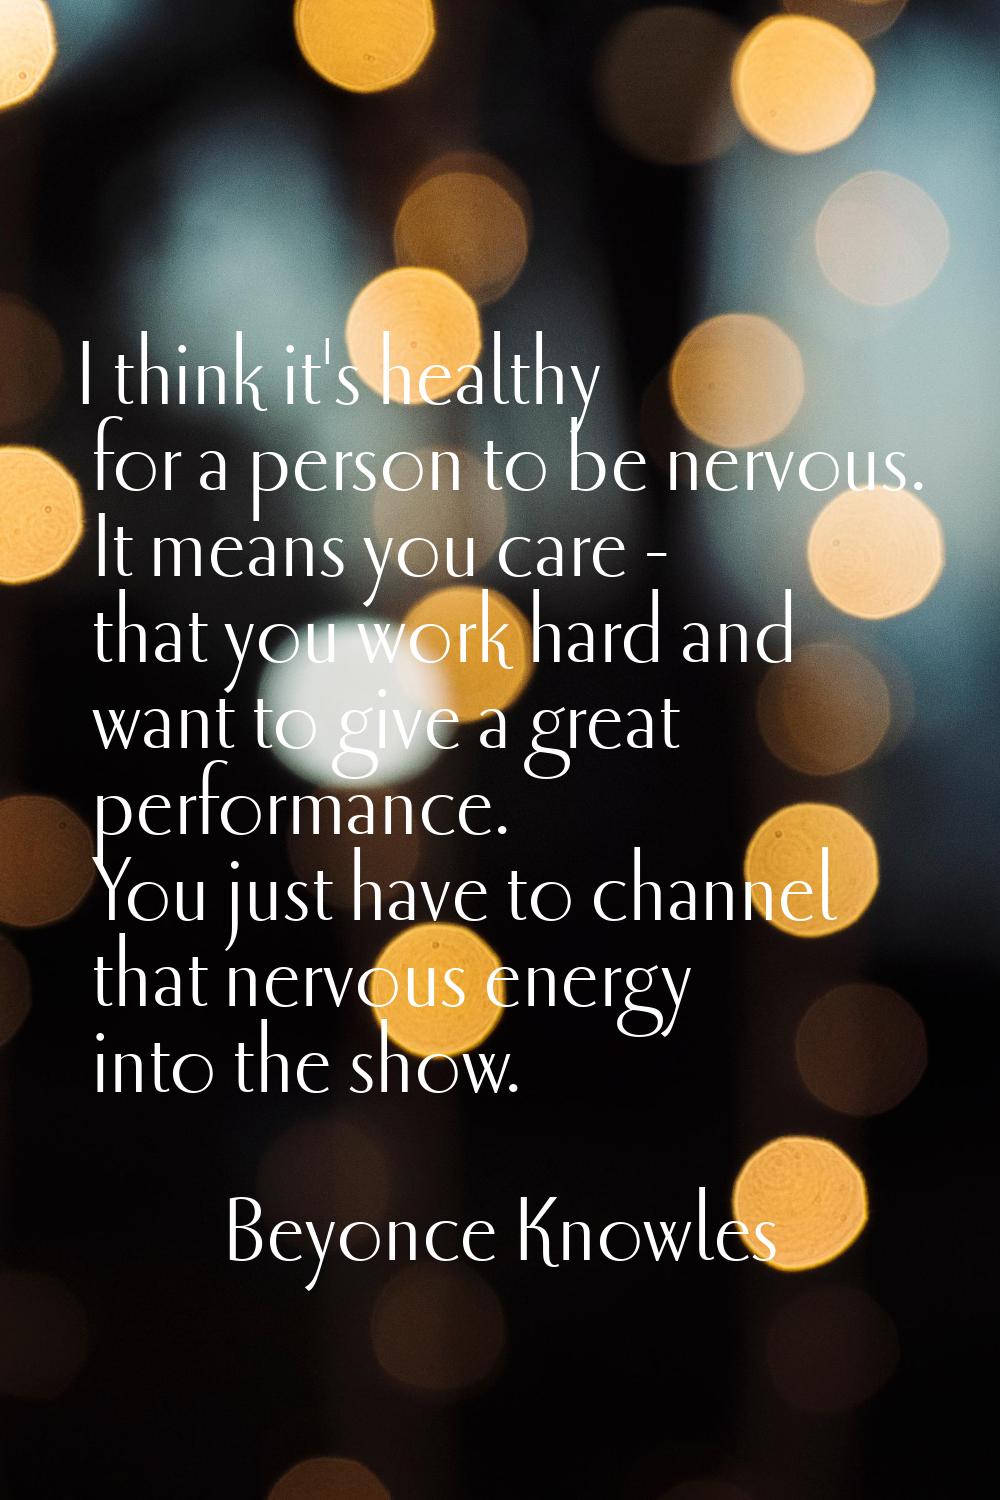 I think it's healthy for a person to be nervous. It means you care - that you work hard and want to